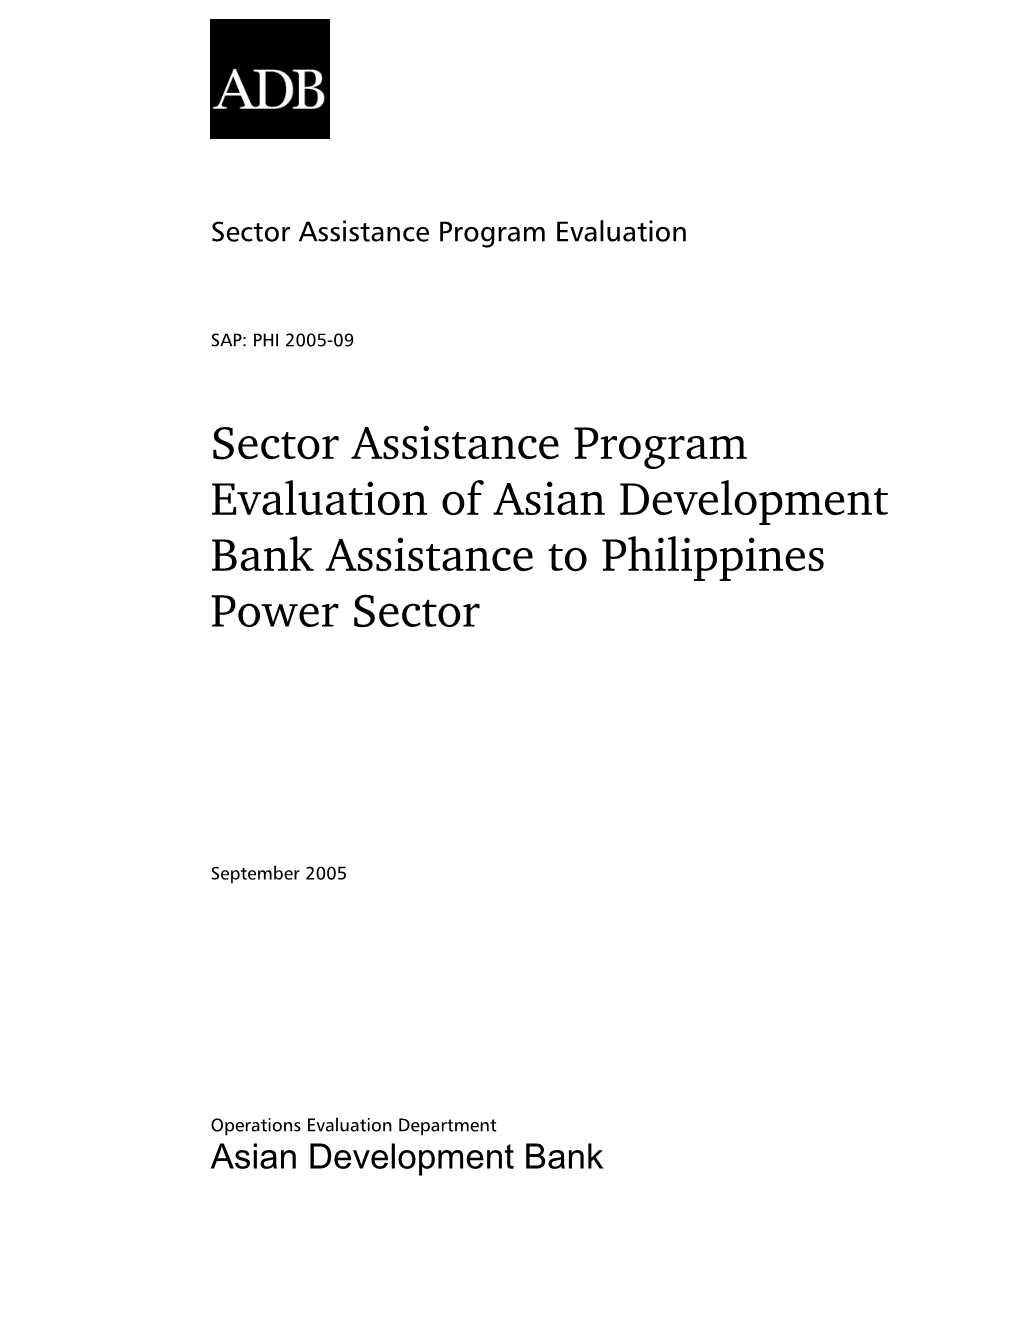 Sector Assistance Program Evaluation of Asian Development Bank Assistance to Philippines Power Sector